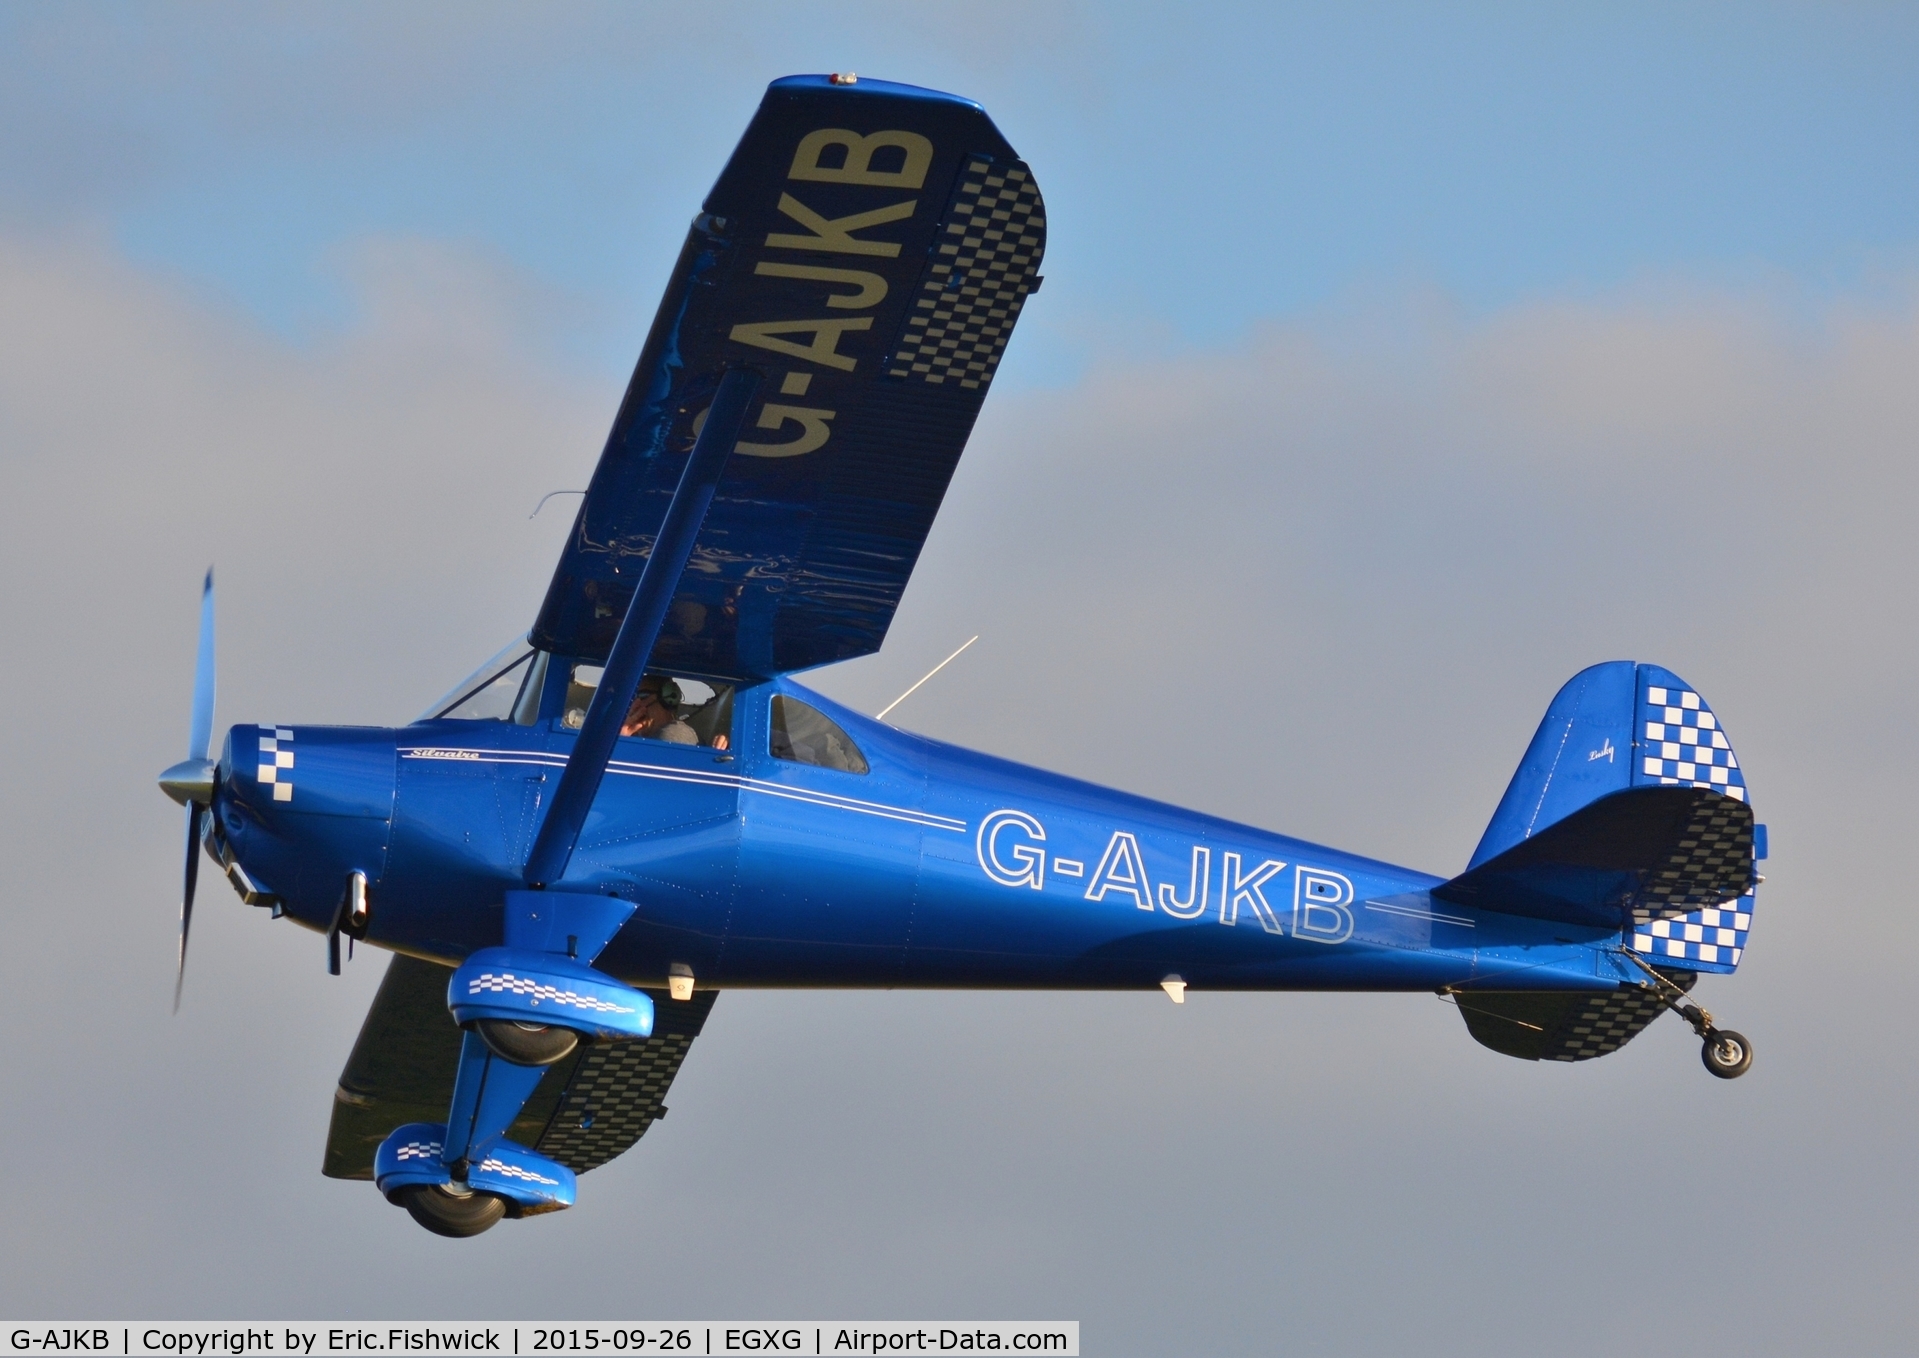 G-AJKB, 1946 Luscombe 8E Silvaire C/N 3058, 44. G-AJKB departing The Yorkshire Air Show, Church Fenton, Sept. 2015.